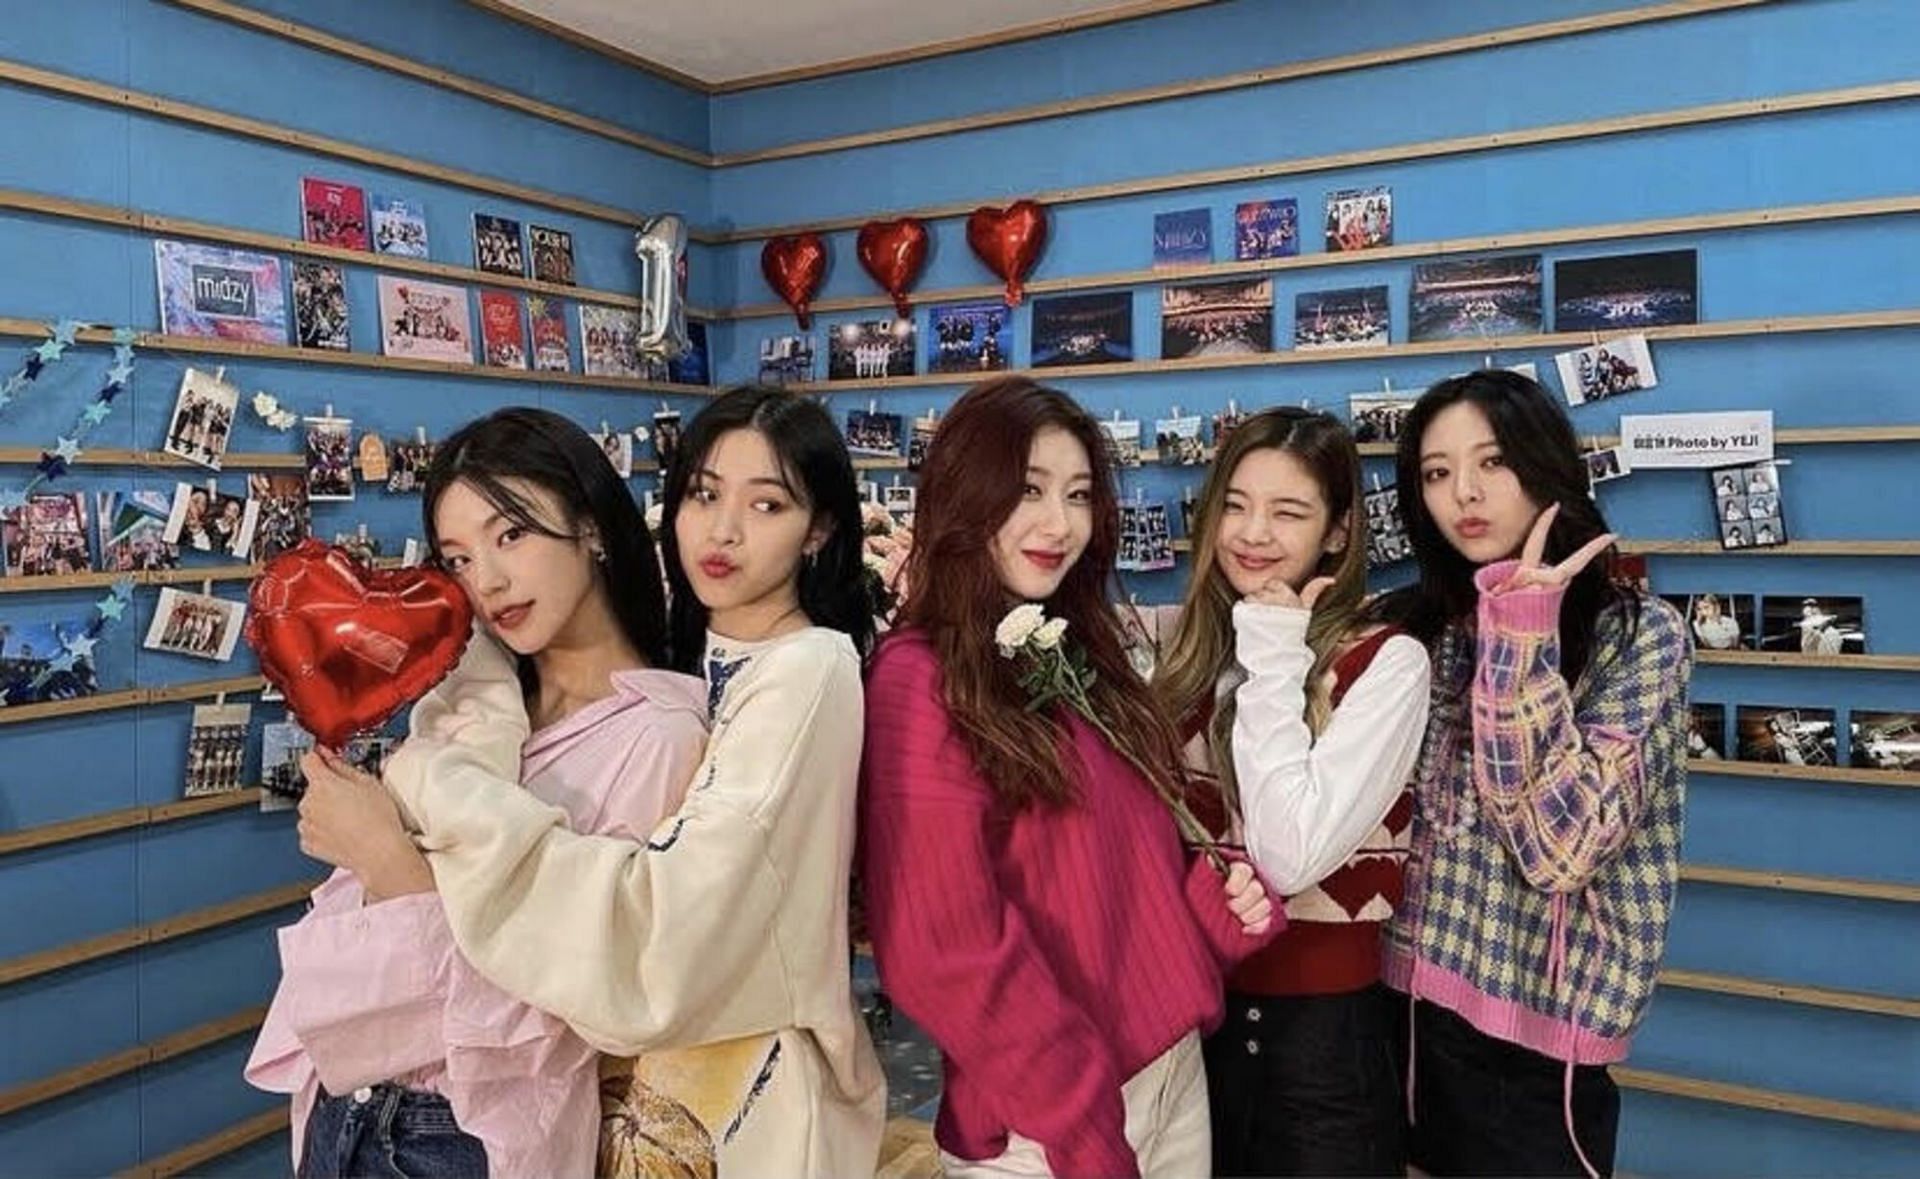 A still of the K-pop group (Image via Instagram/@itzy.all.in.us)